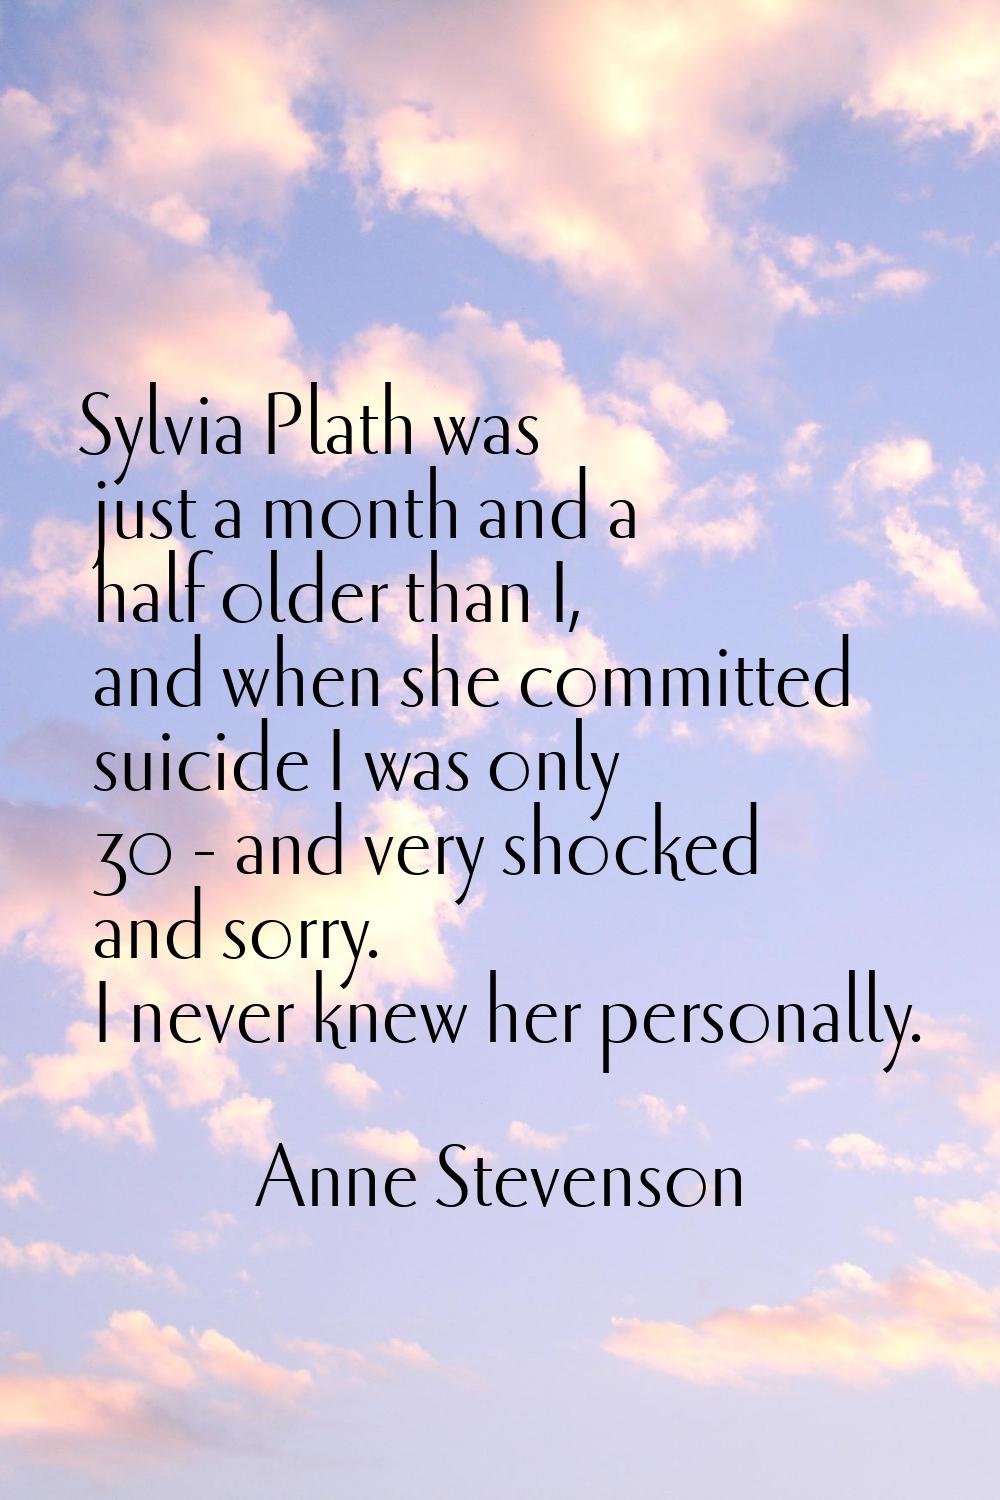 Sylvia Plath was just a month and a half older than I, and when she committed suicide I was only 30